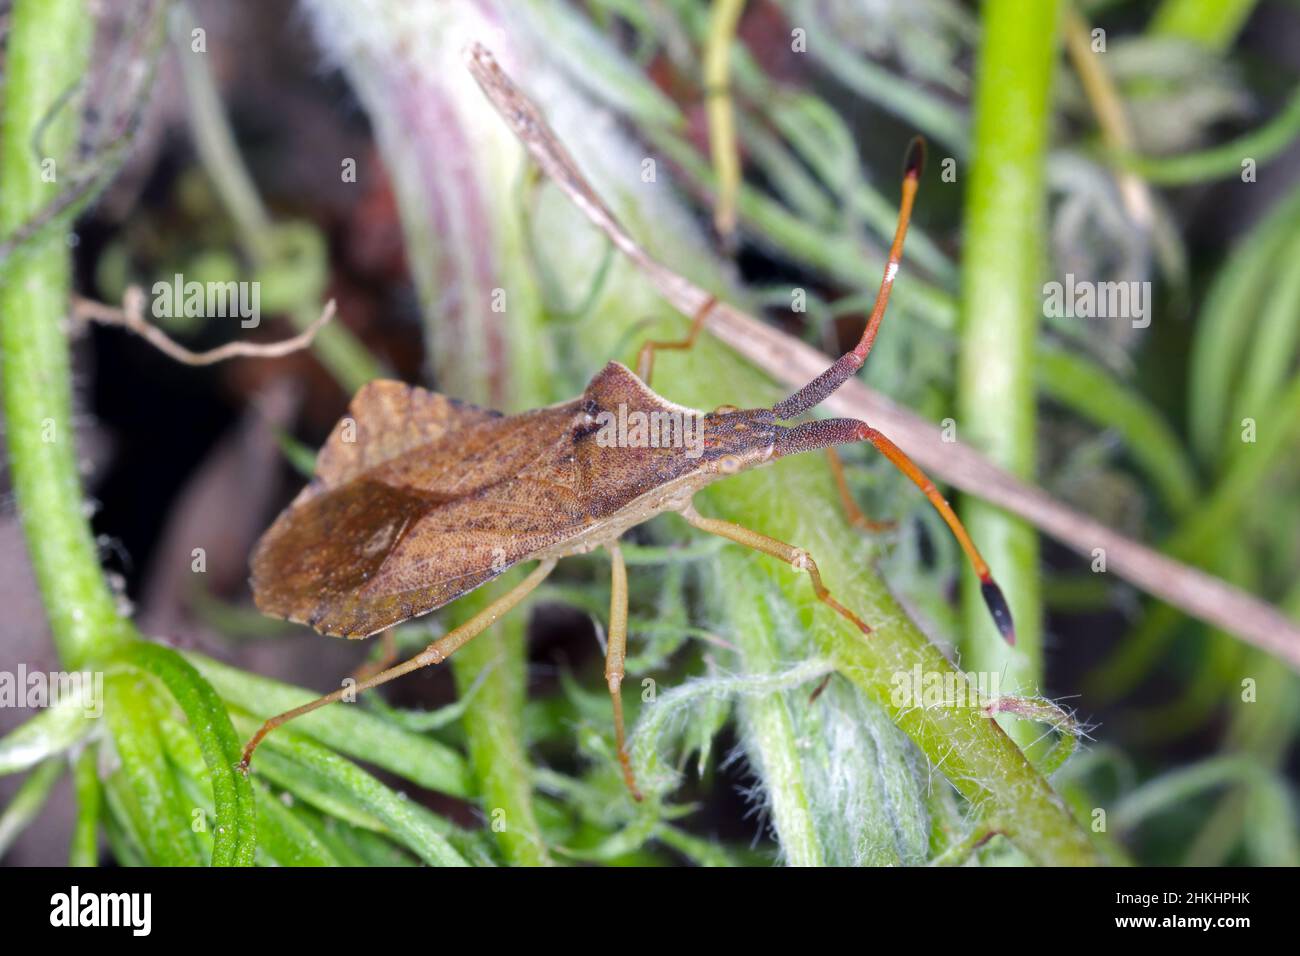 A closeup shot of a Rhombic Leatherbug, Syromastus rhombeus, sipping from a fresh plant. Stock Photo